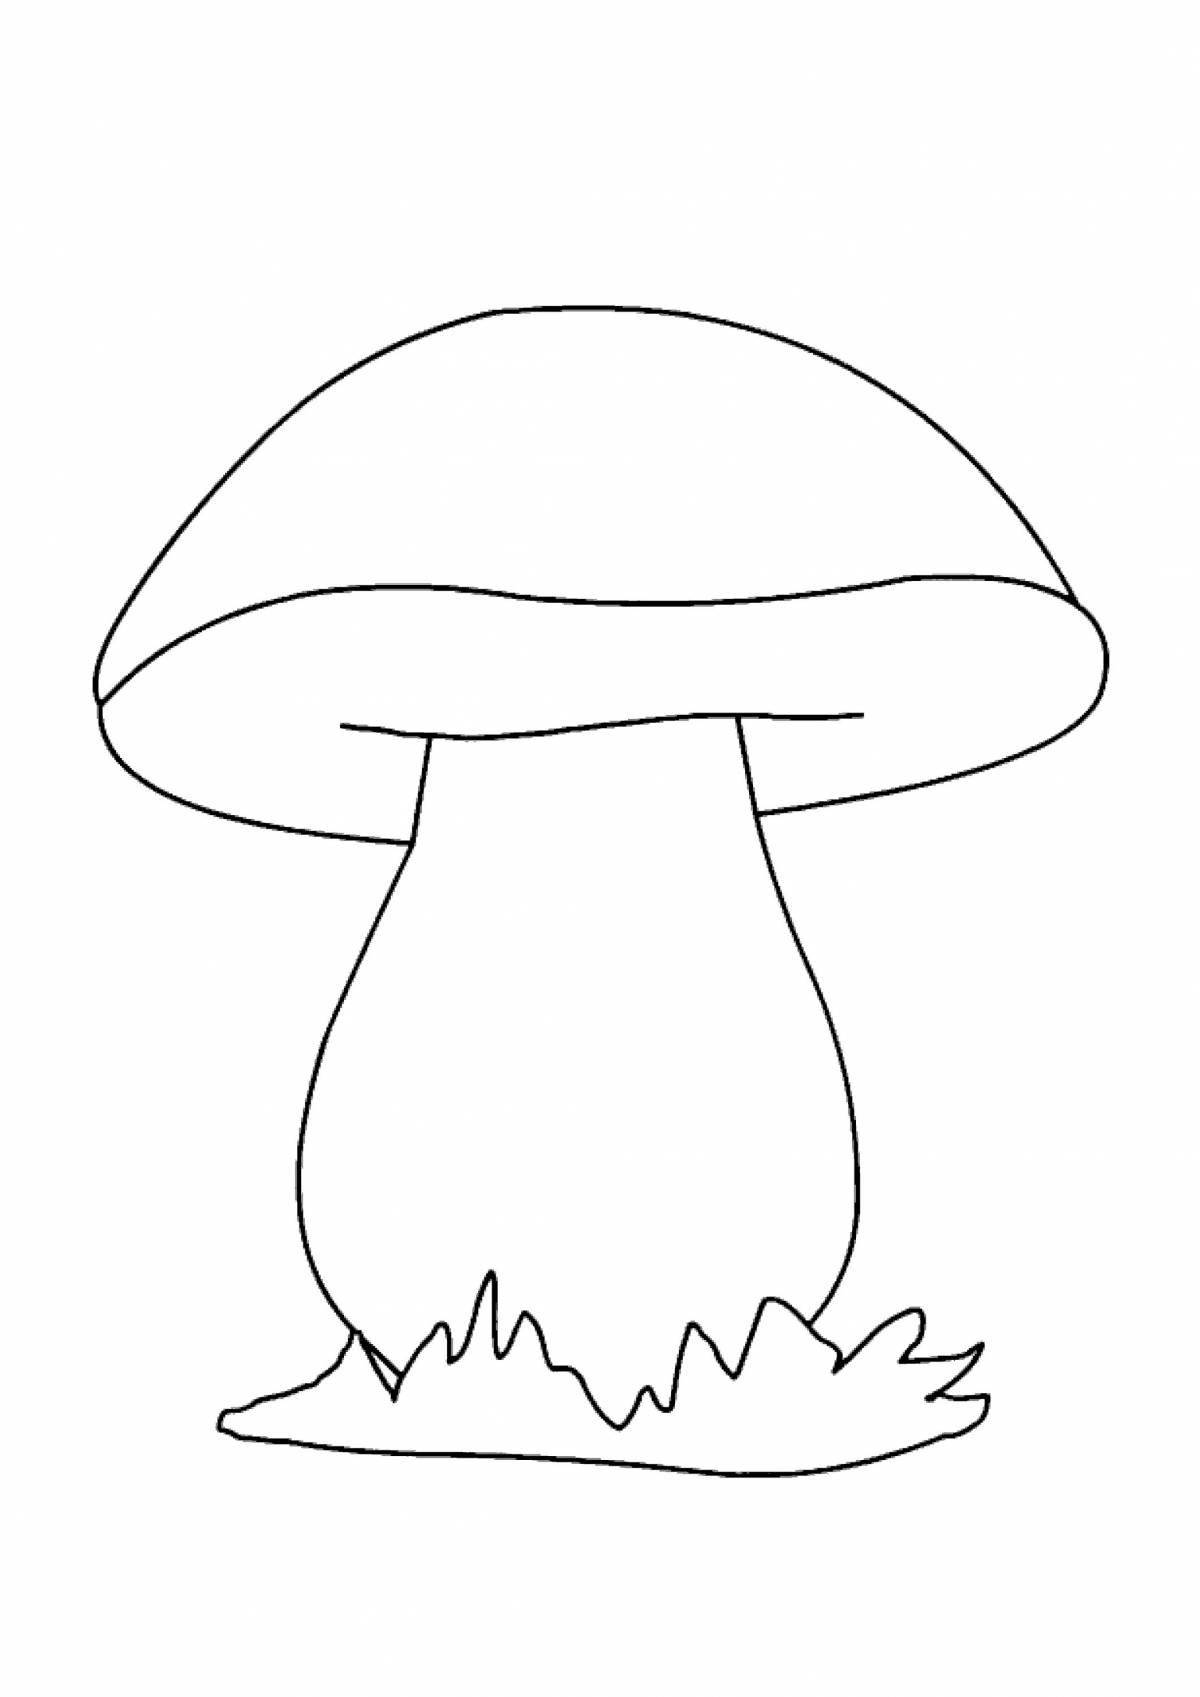 Exquisite mushroom coloring book for 3-4 year olds